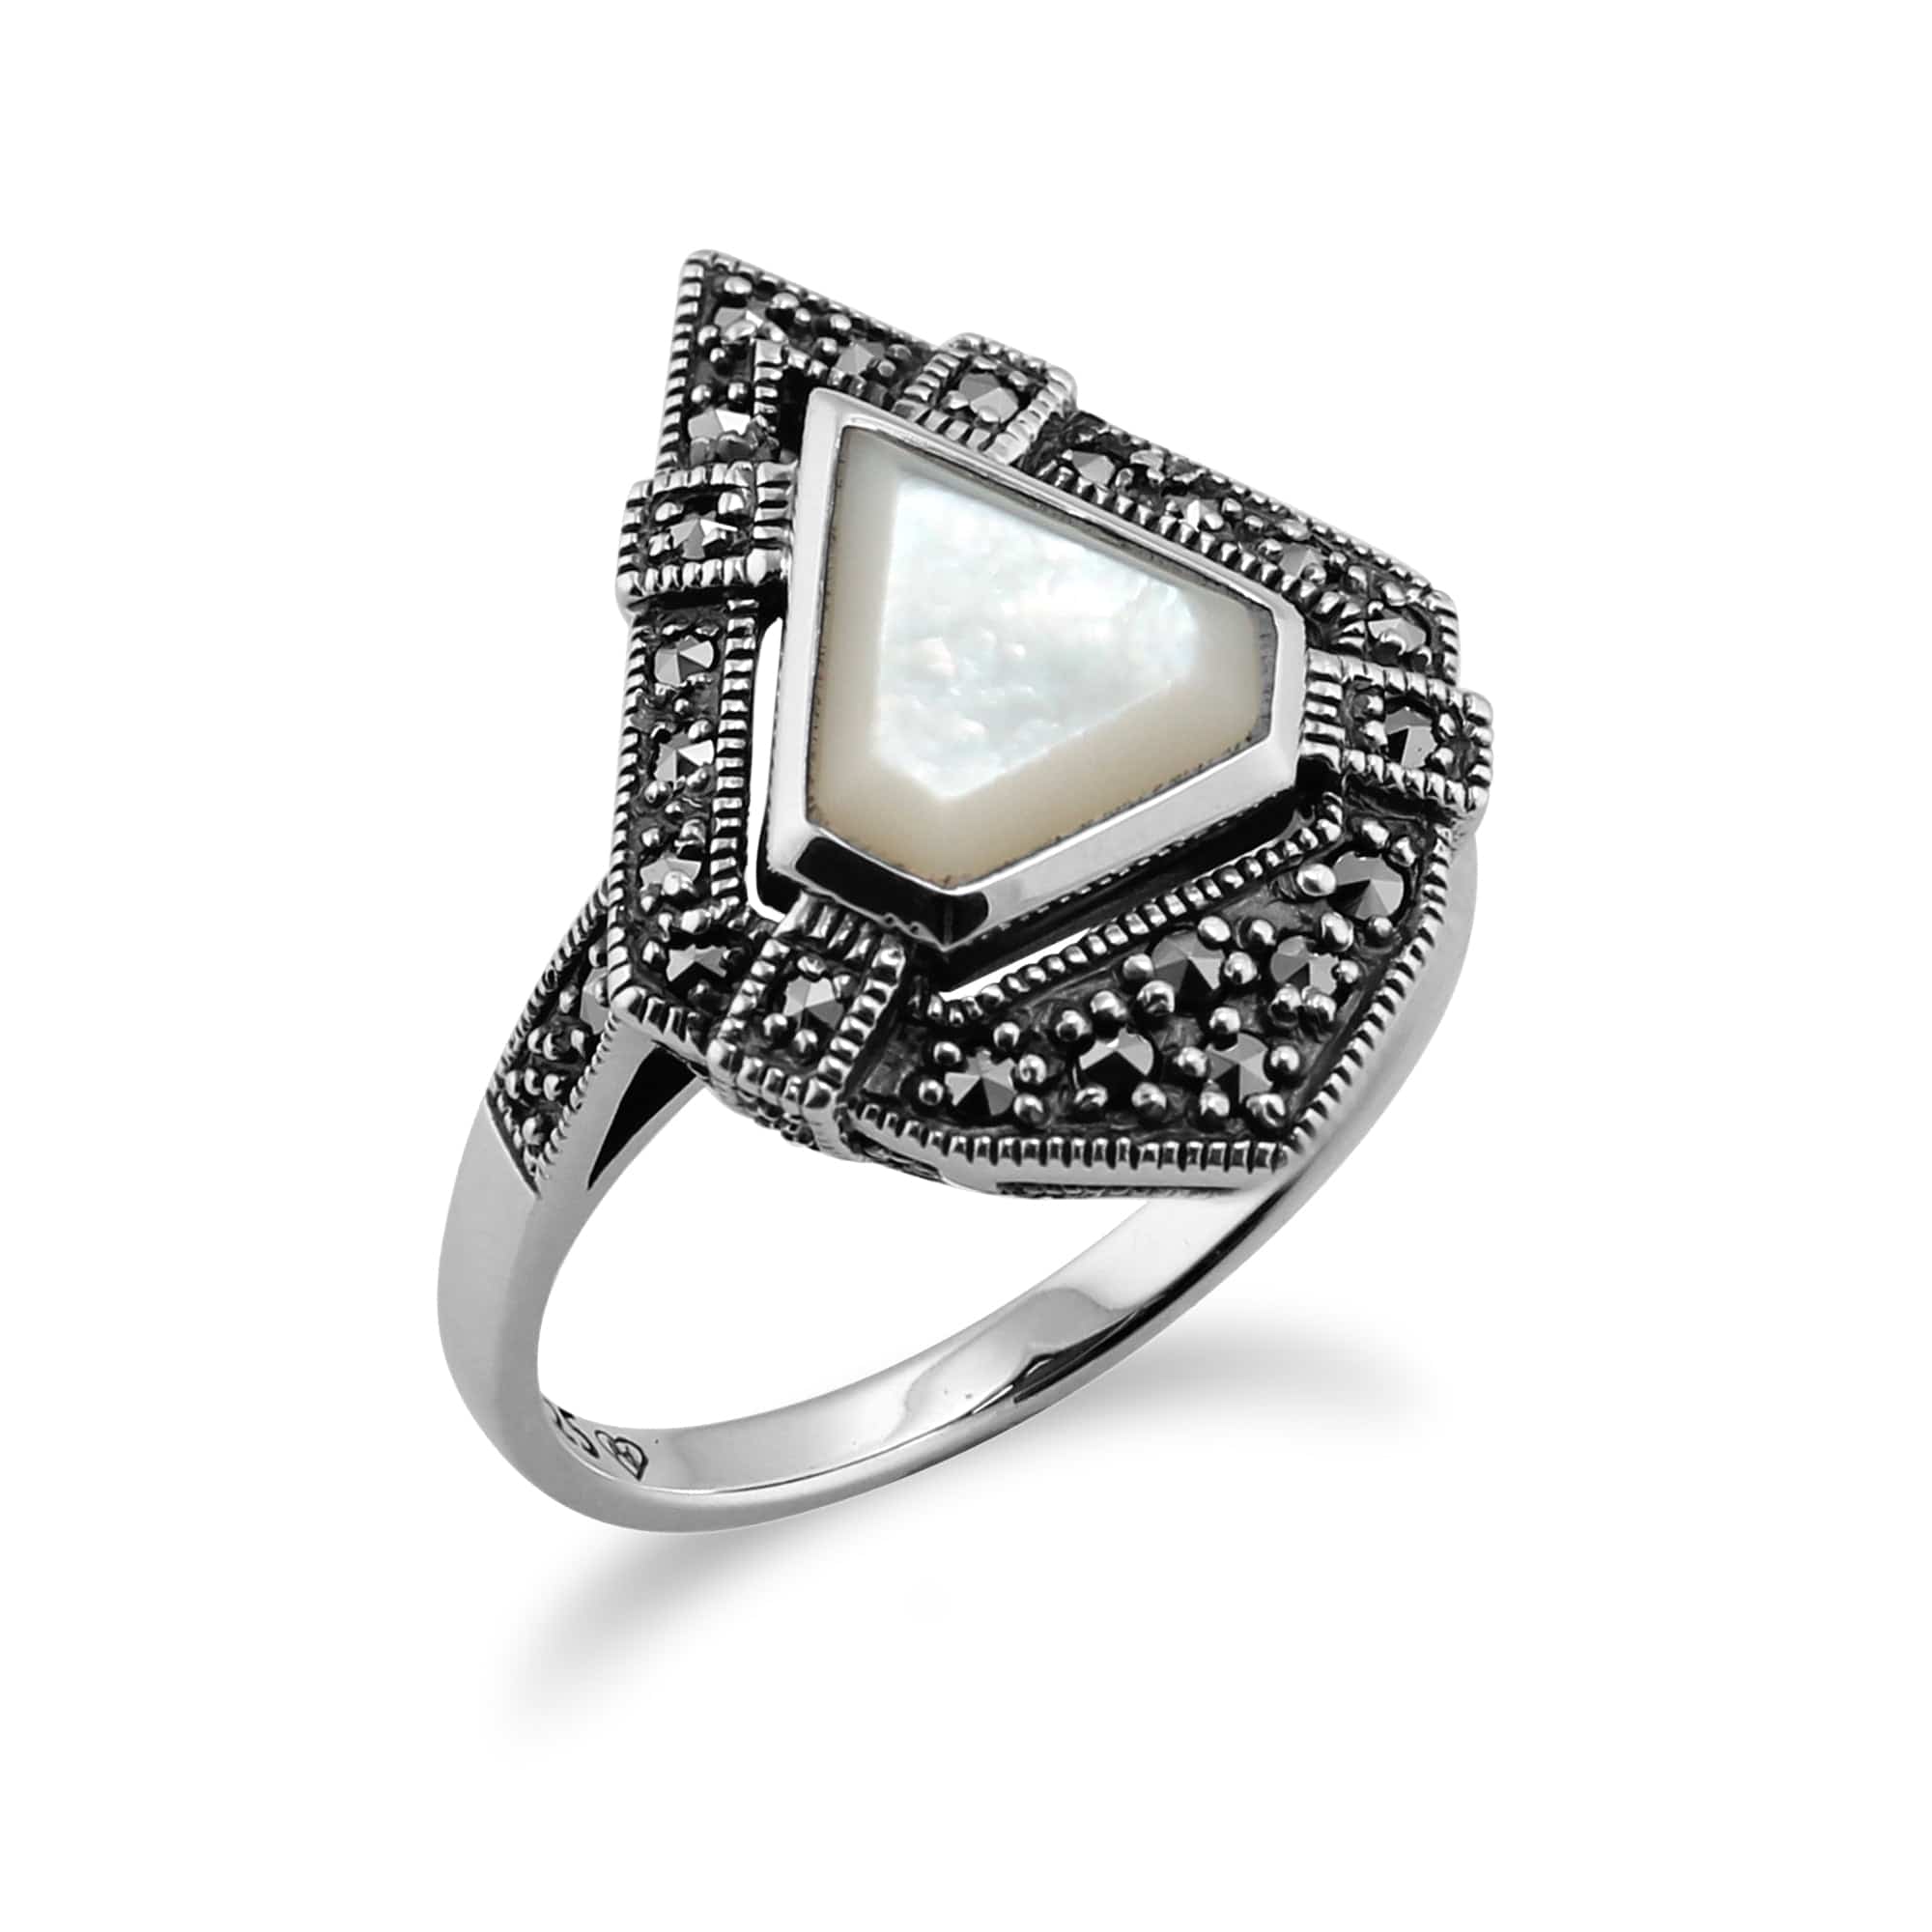 214R479301925 Art Deco Style Triangle Mother of Pearl & Marcasite Statement Ring 4